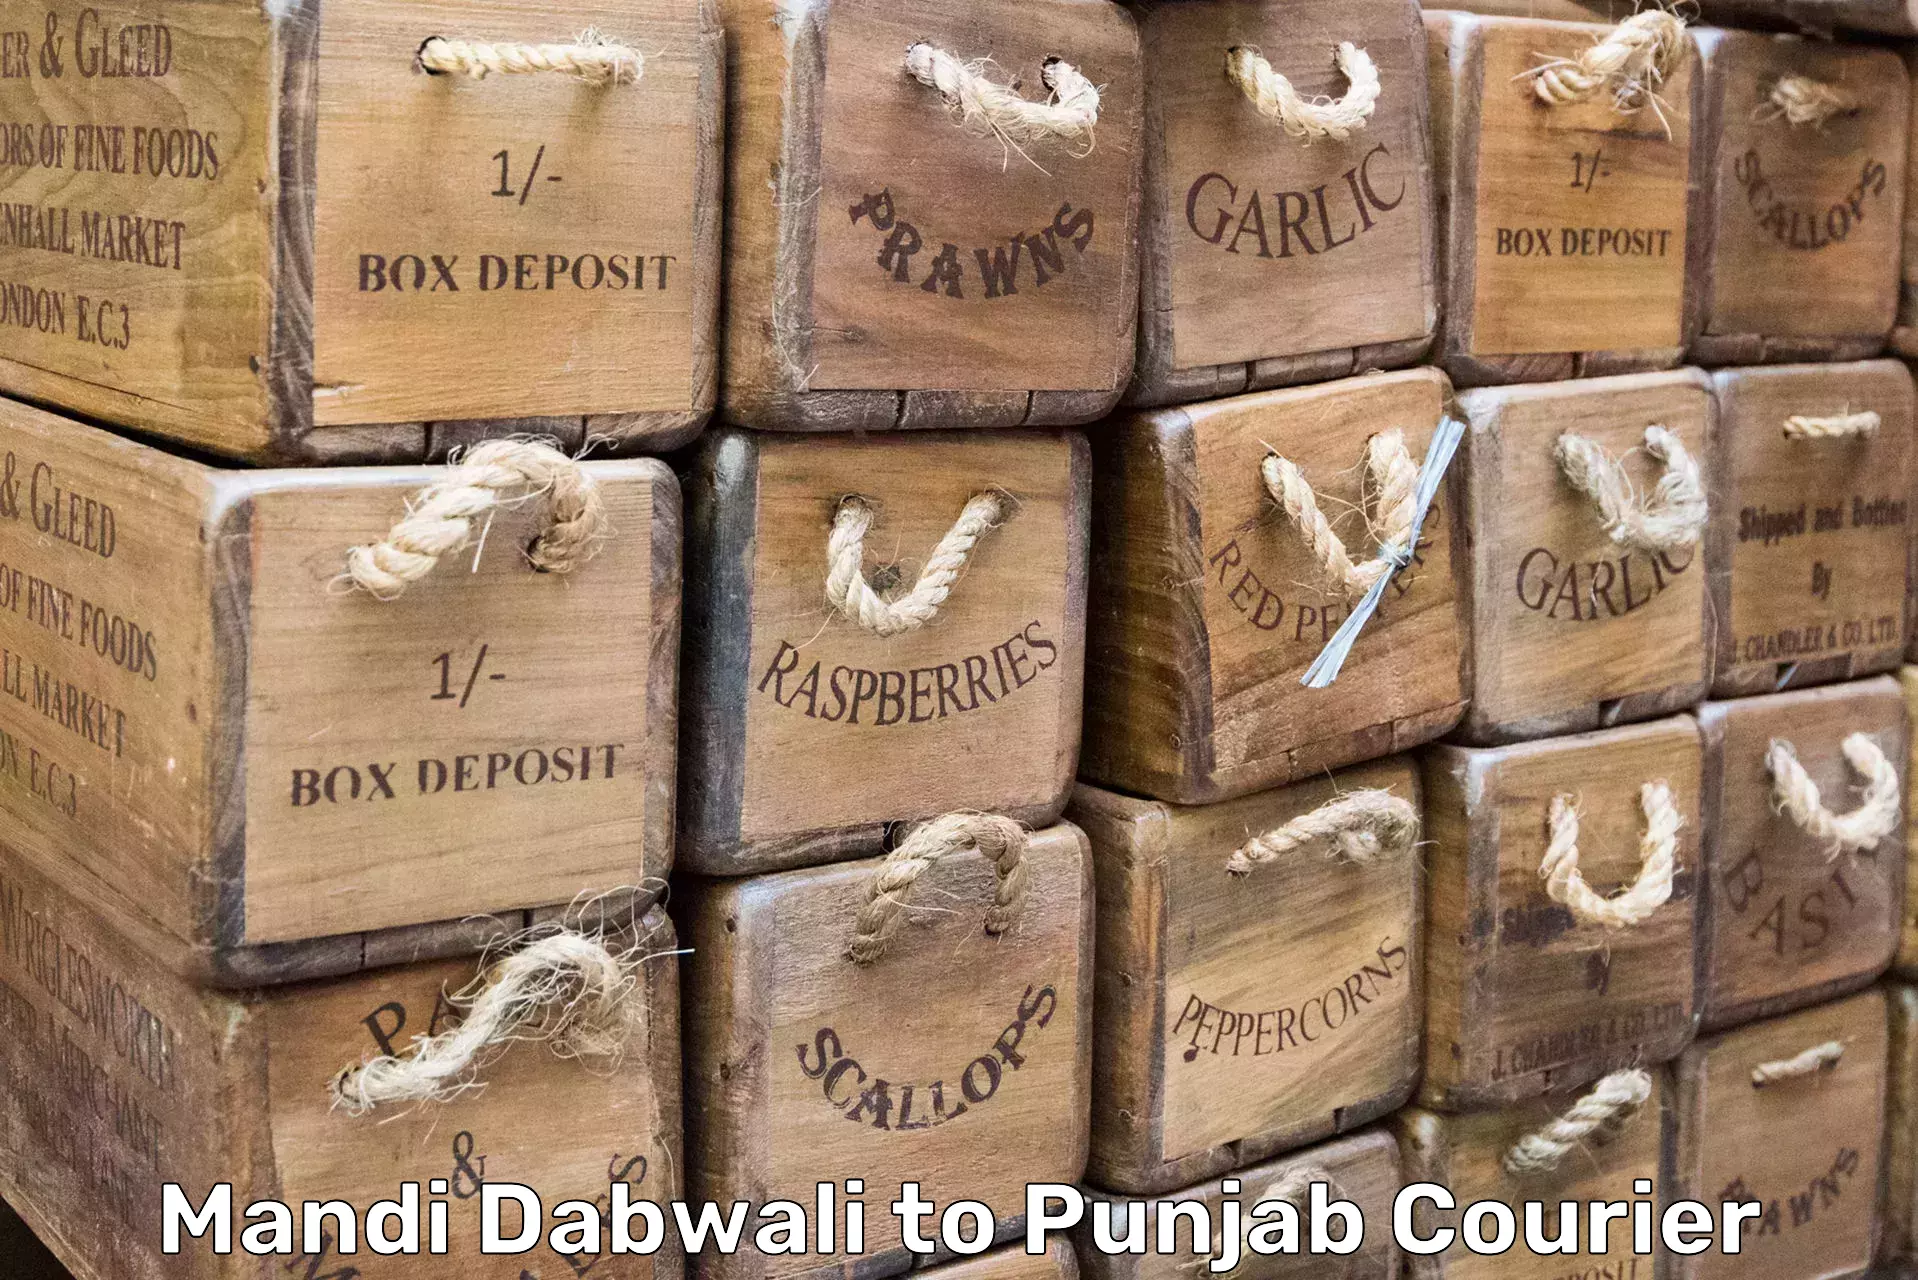 Moving and storage services Mandi Dabwali to Mohali